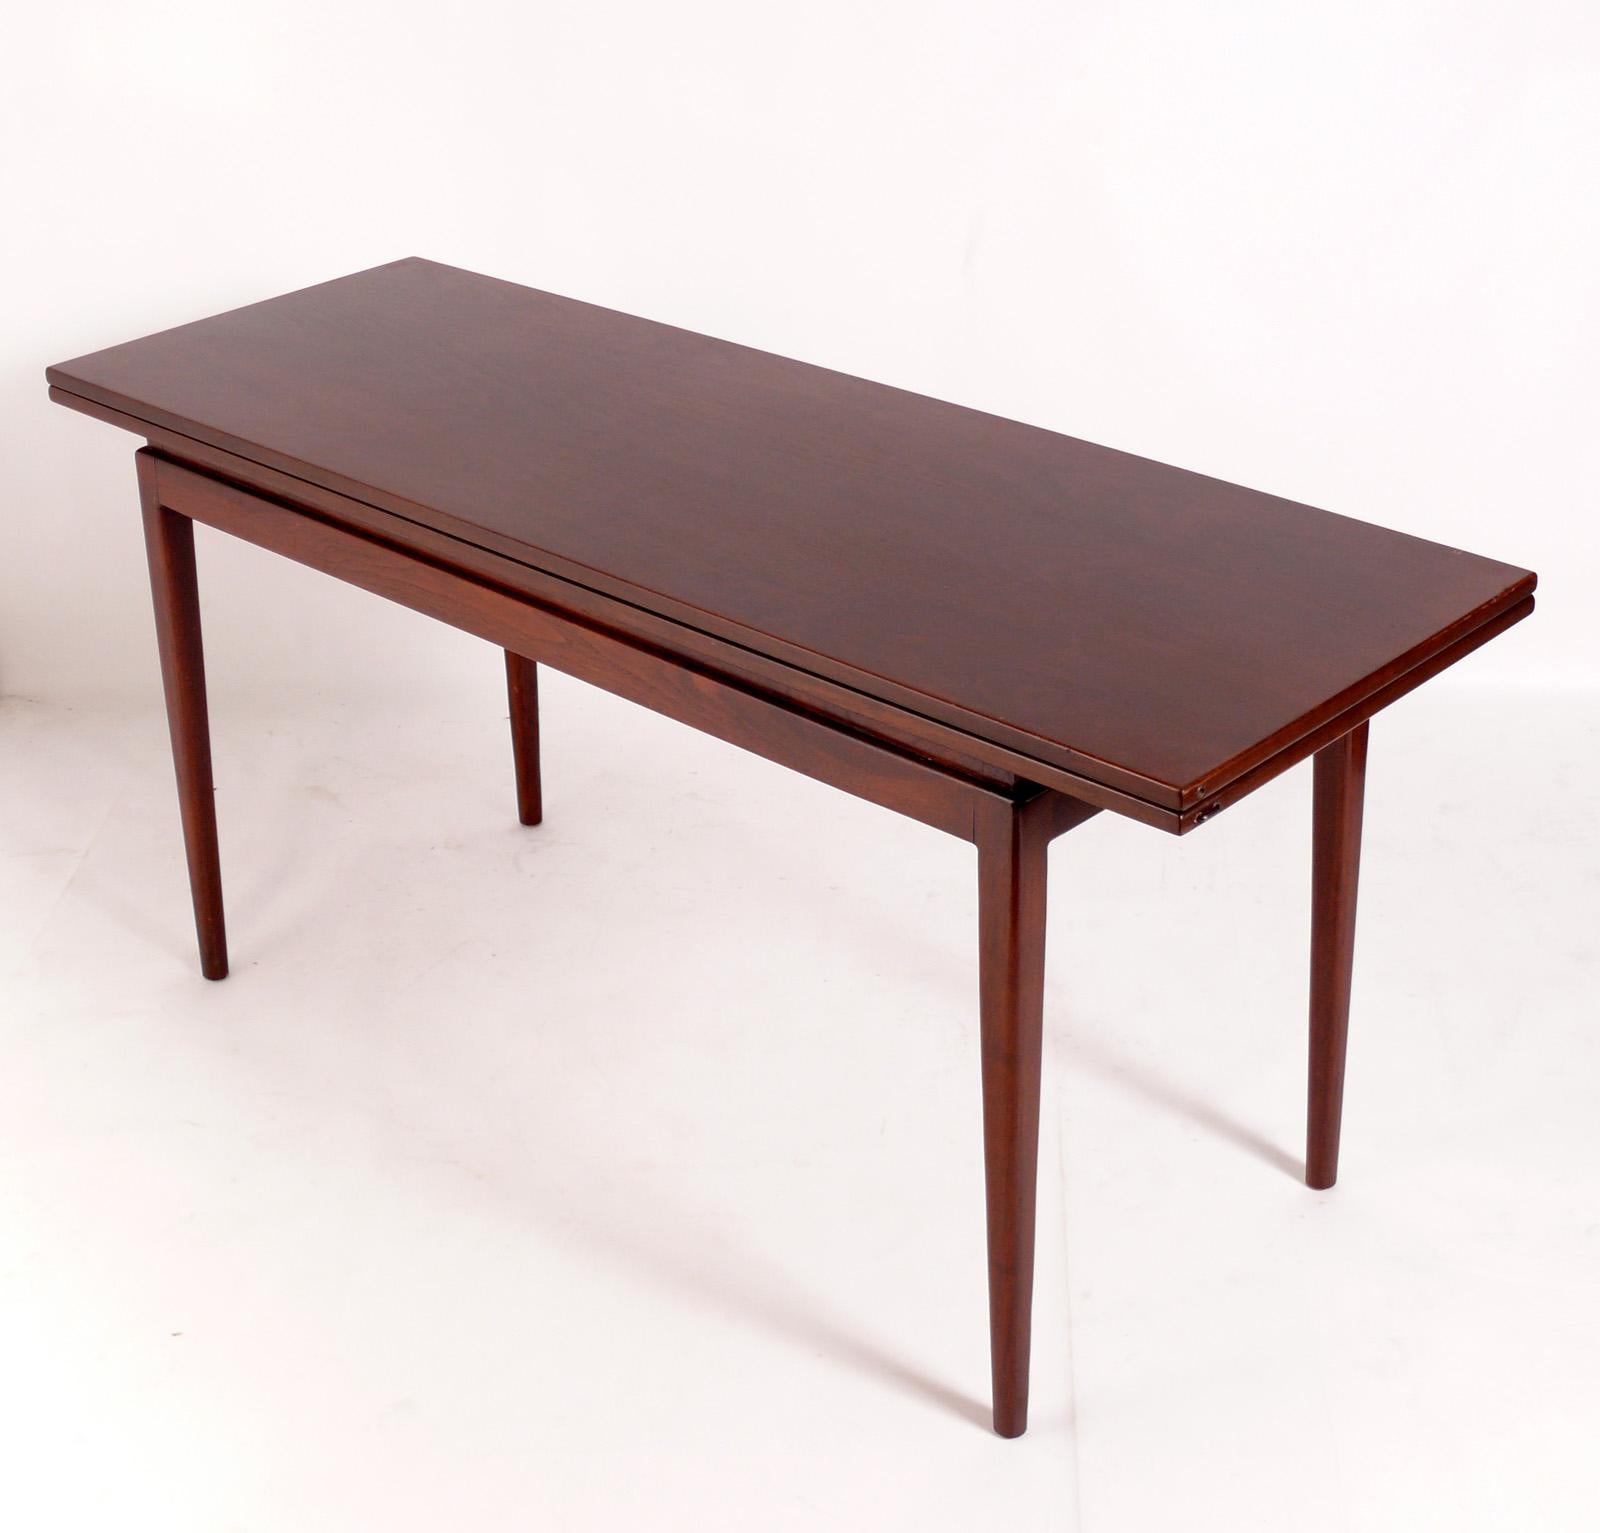 Clean Lined Mid Century Walnut Console Table, designed by Jens Risom, American, circa 1950s. This table is the perfect multi use table for an NYC apartment. It can be used as a console table, desk, or bar, and then the table top flips open to dining